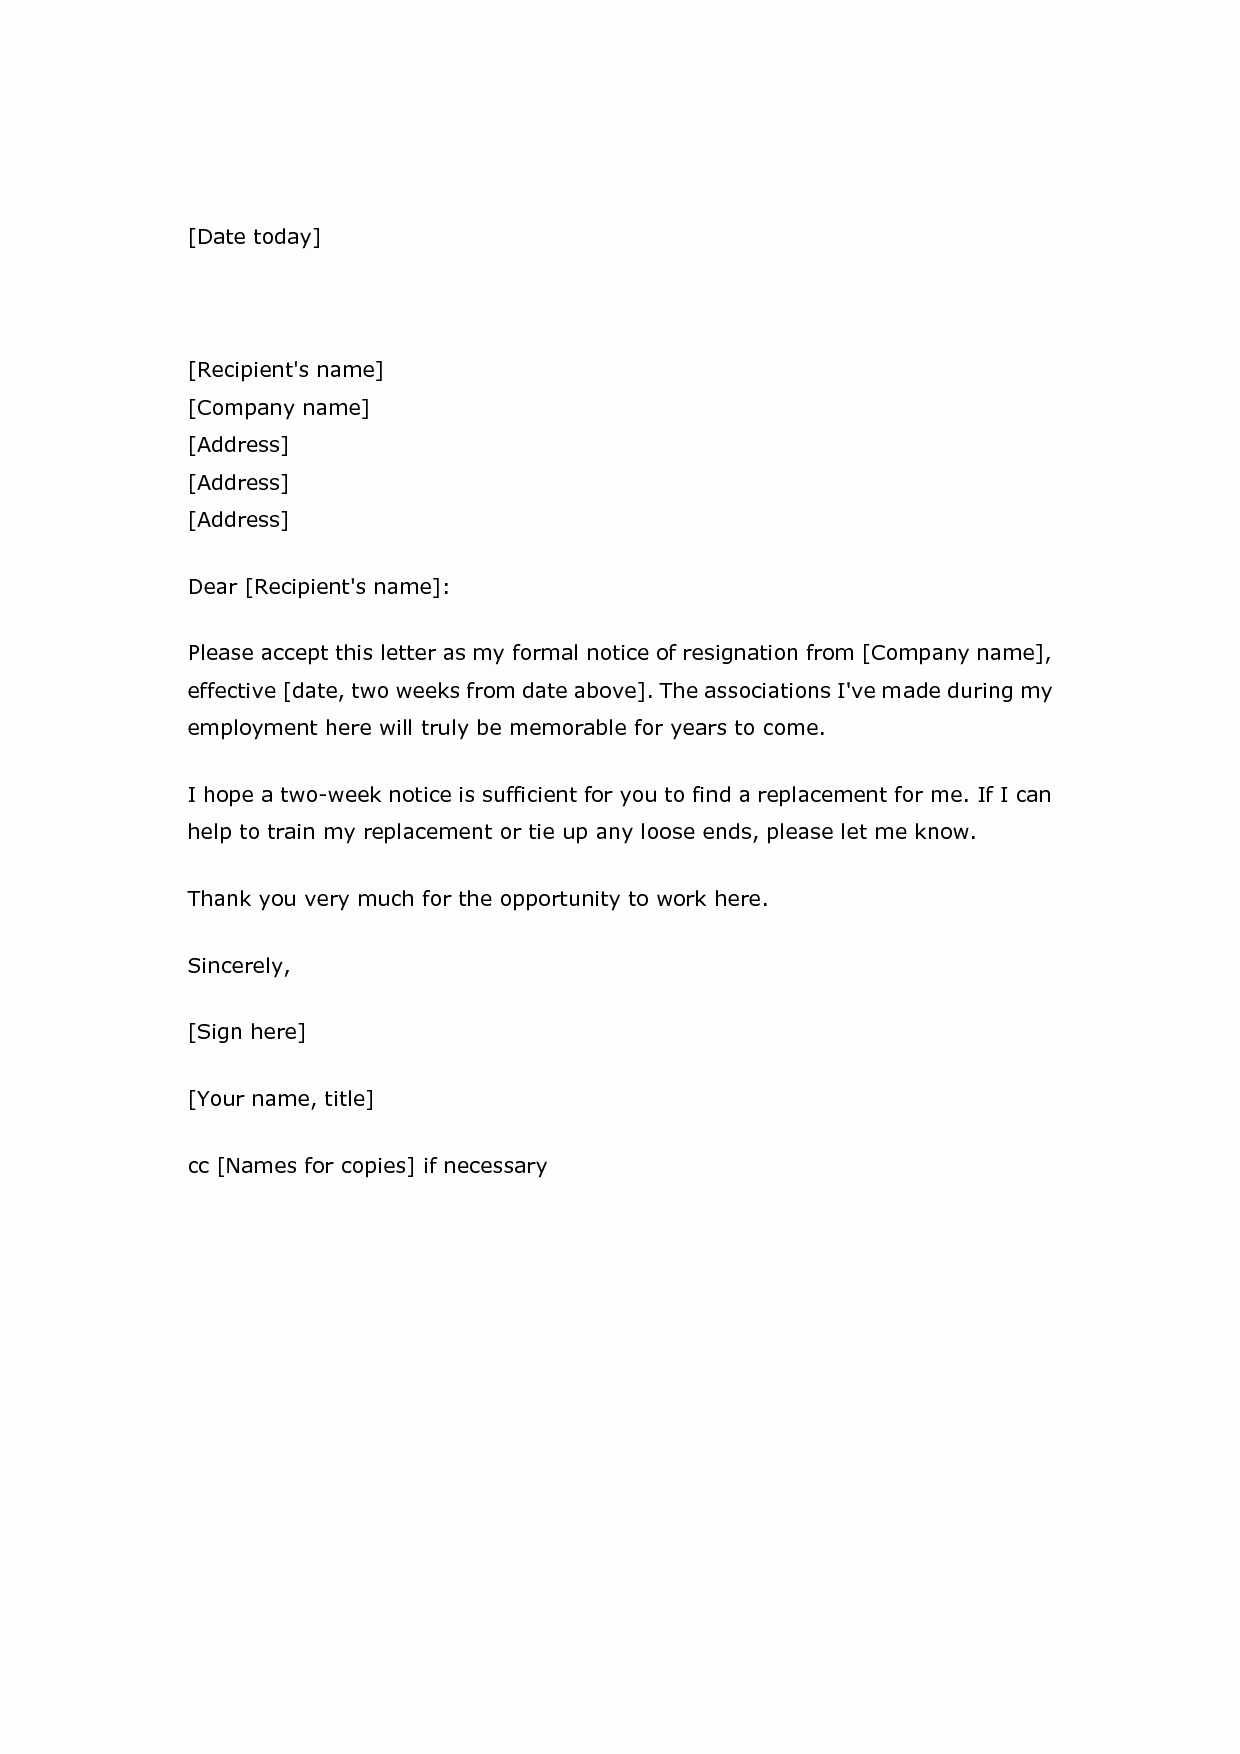 2 Weeks Notice Letter format Luxury Basic Two Week Notice Resignation Letter Samples 2016